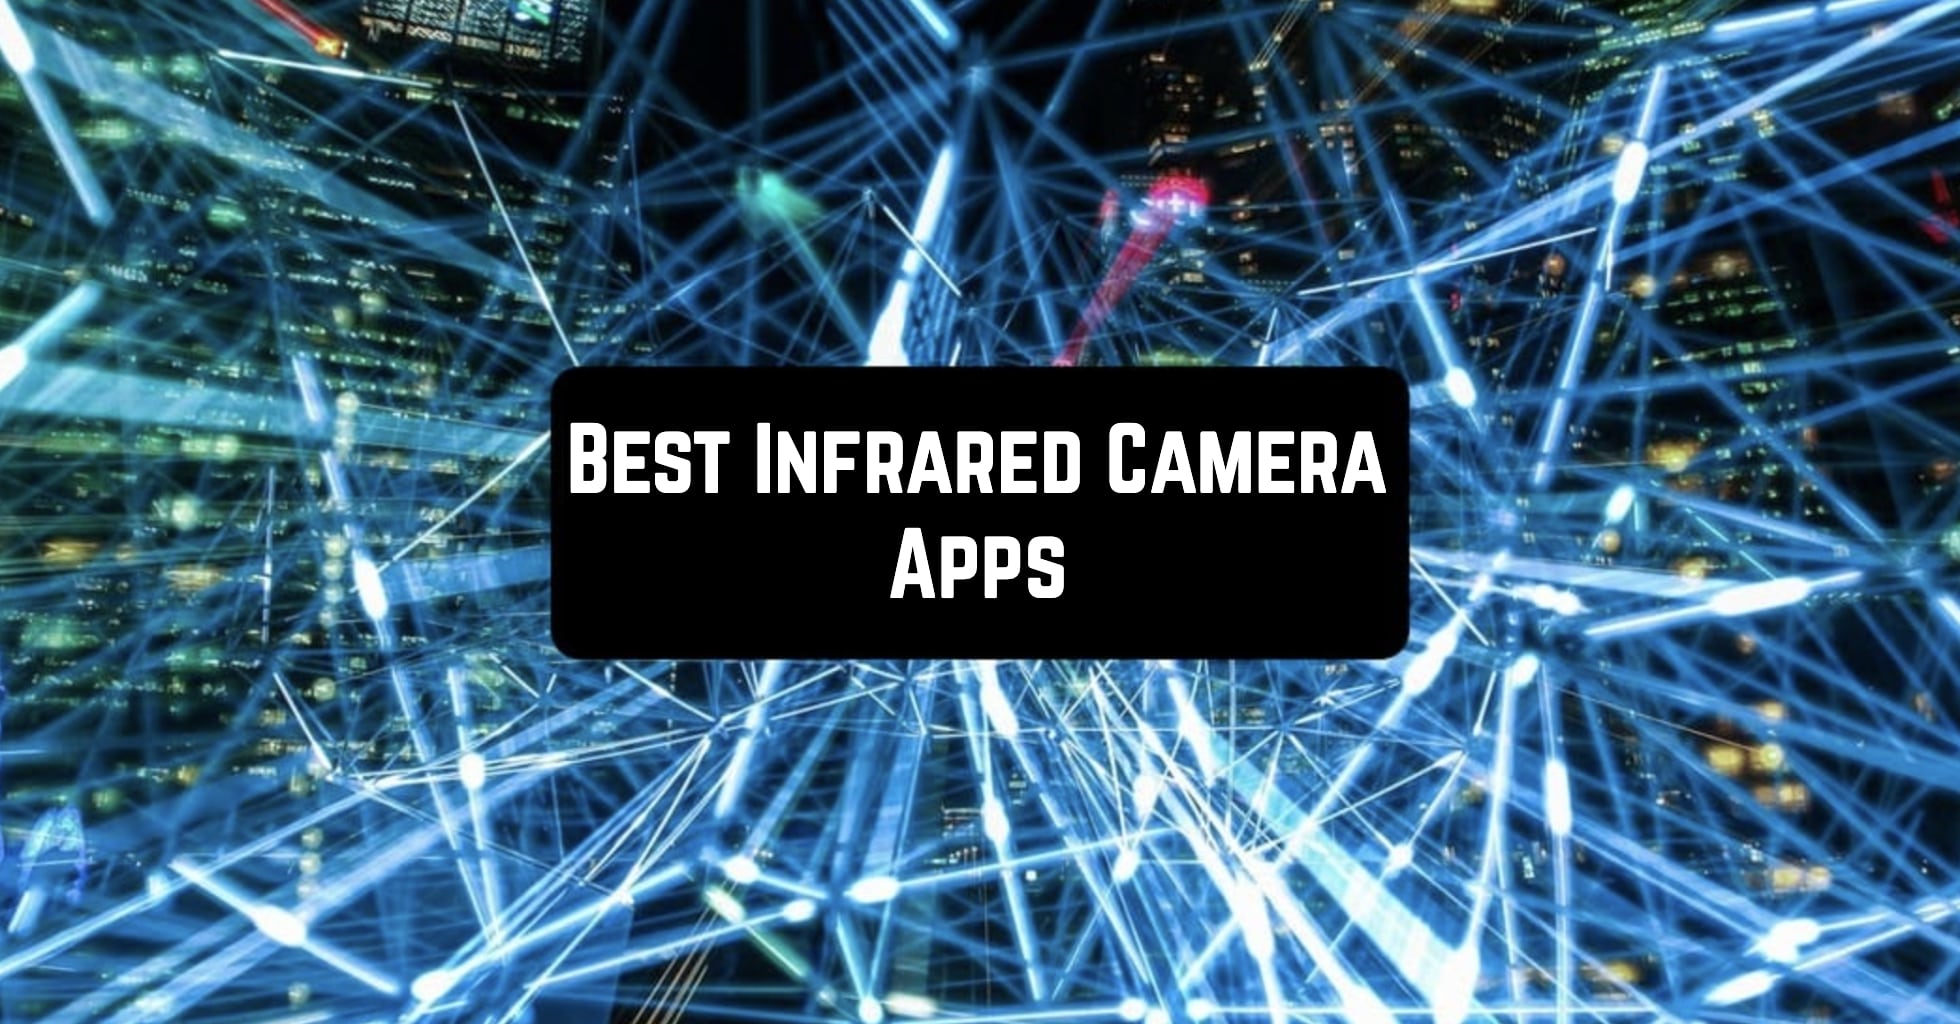 11 Best Infrared Camera Apps for Android & iOS